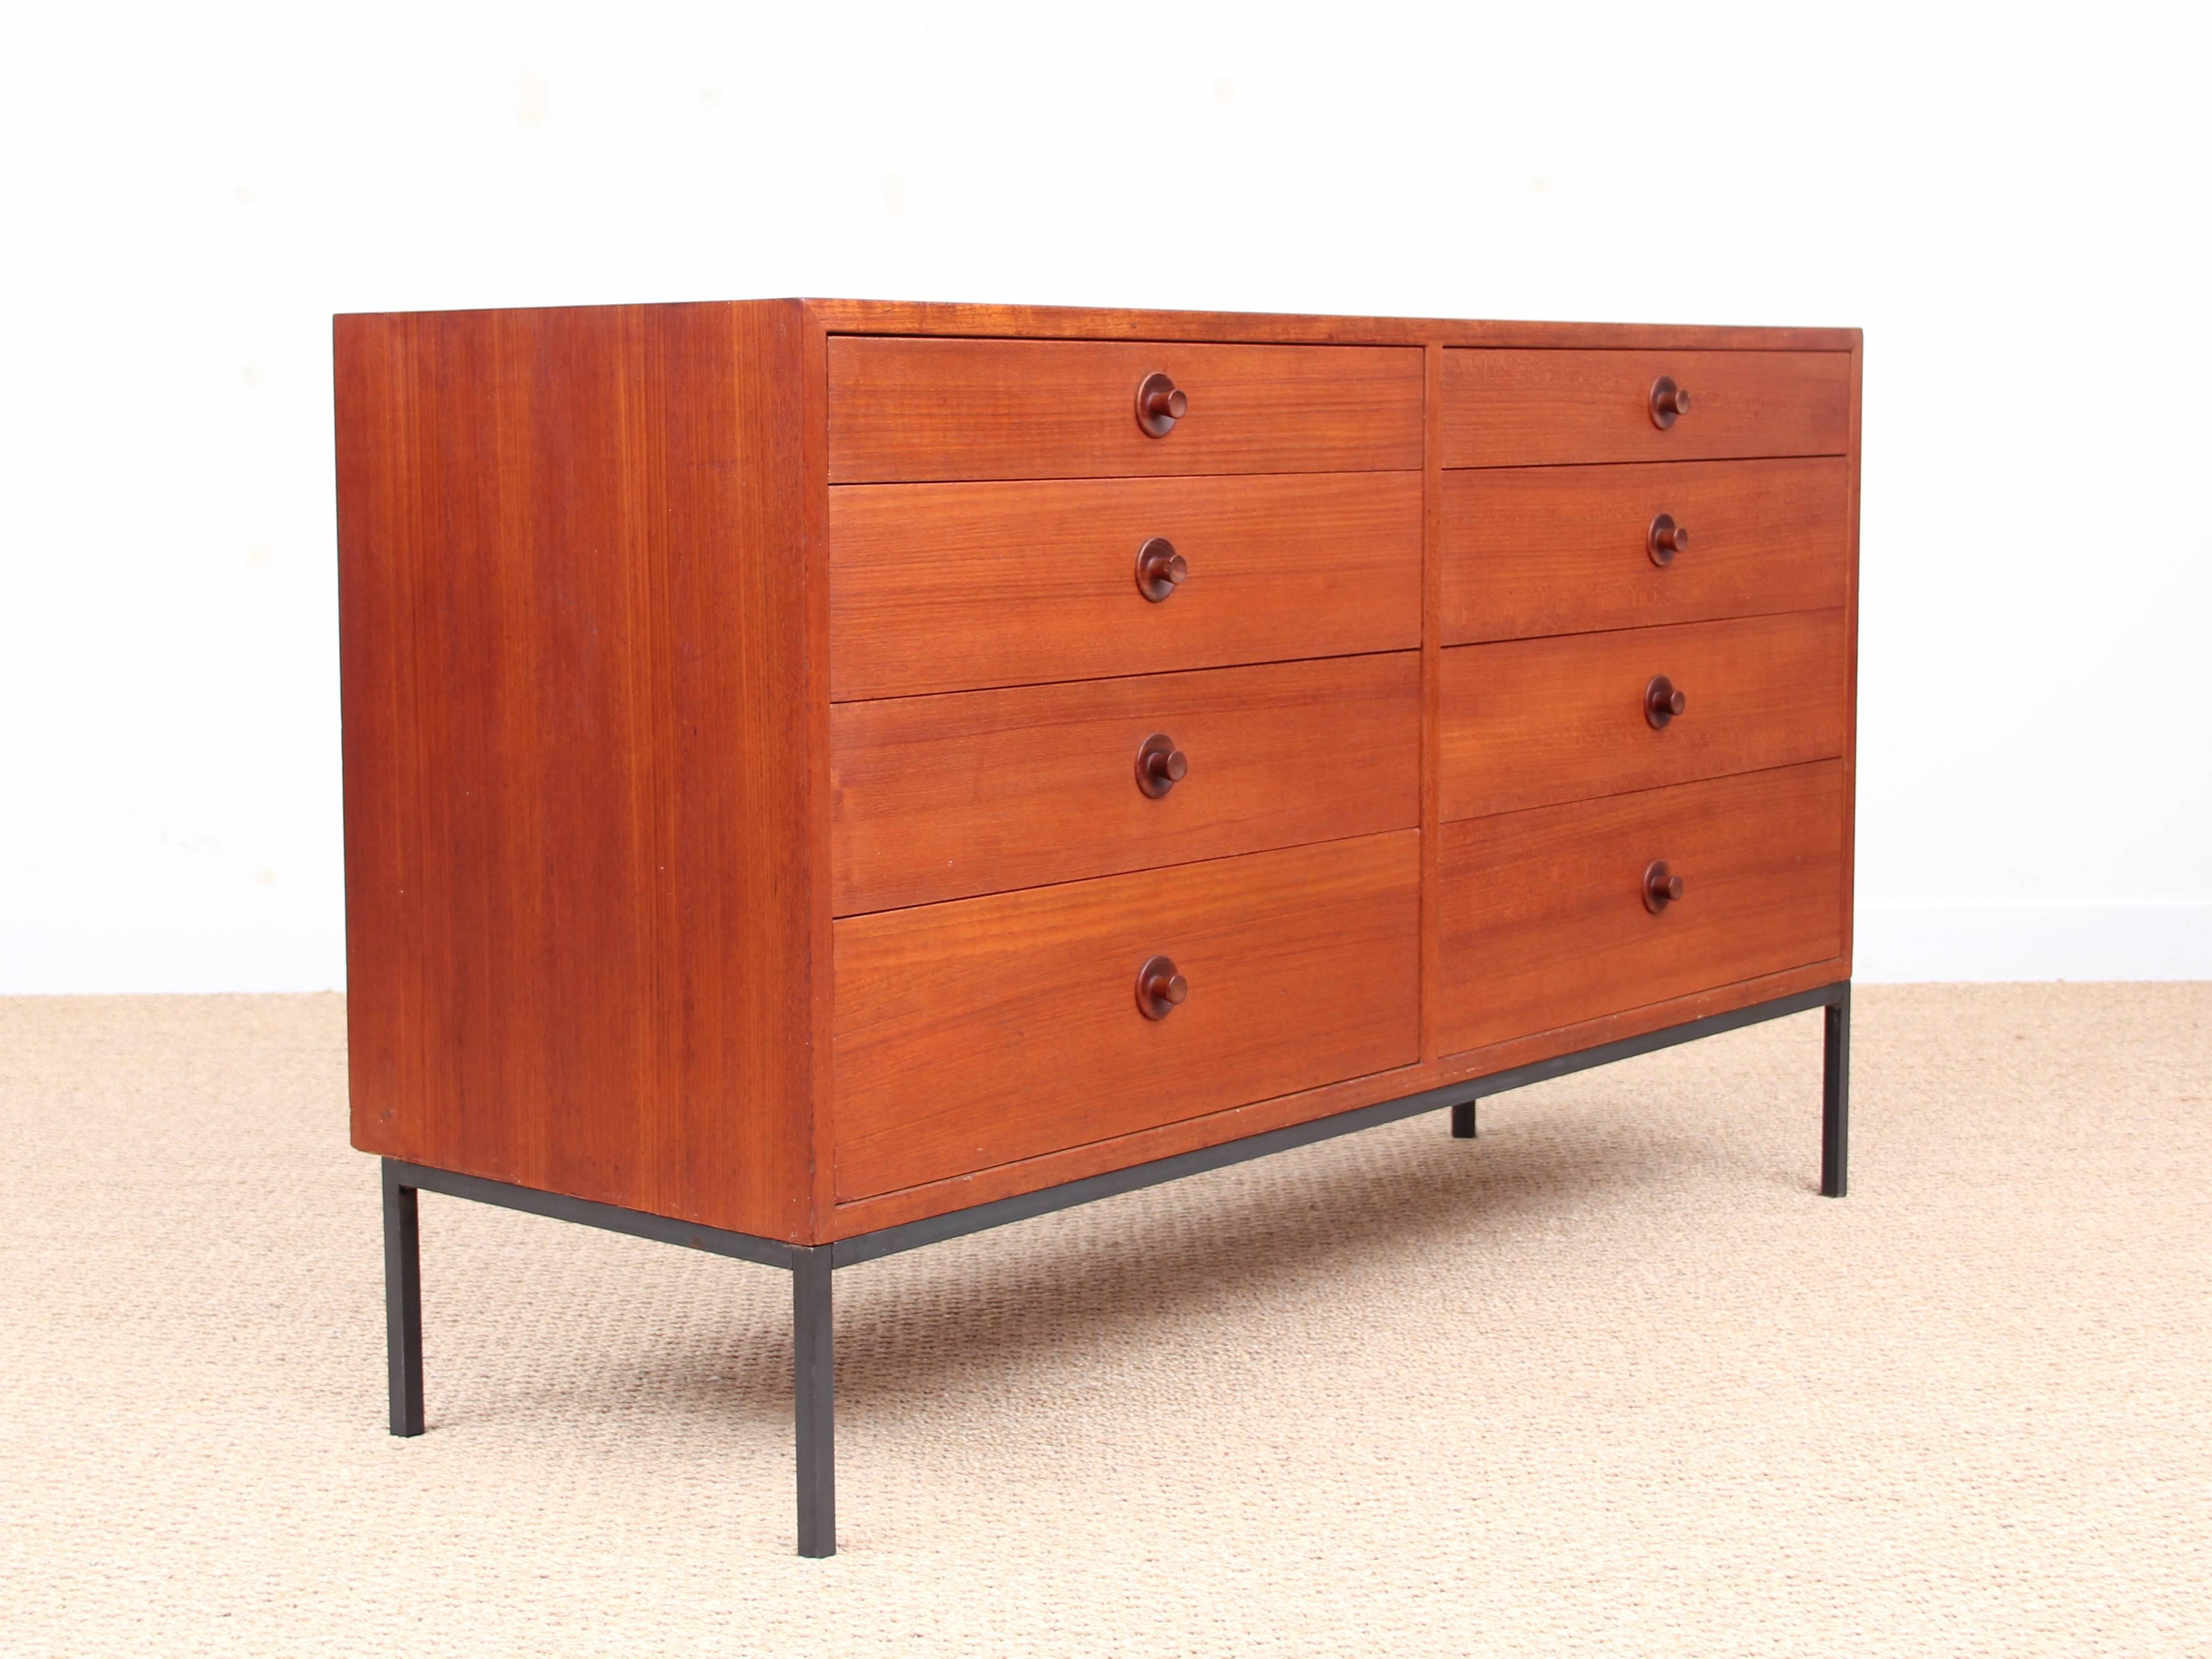 Danish Mid-Century Modern Double Chest of Drawers by Borge Mogensen